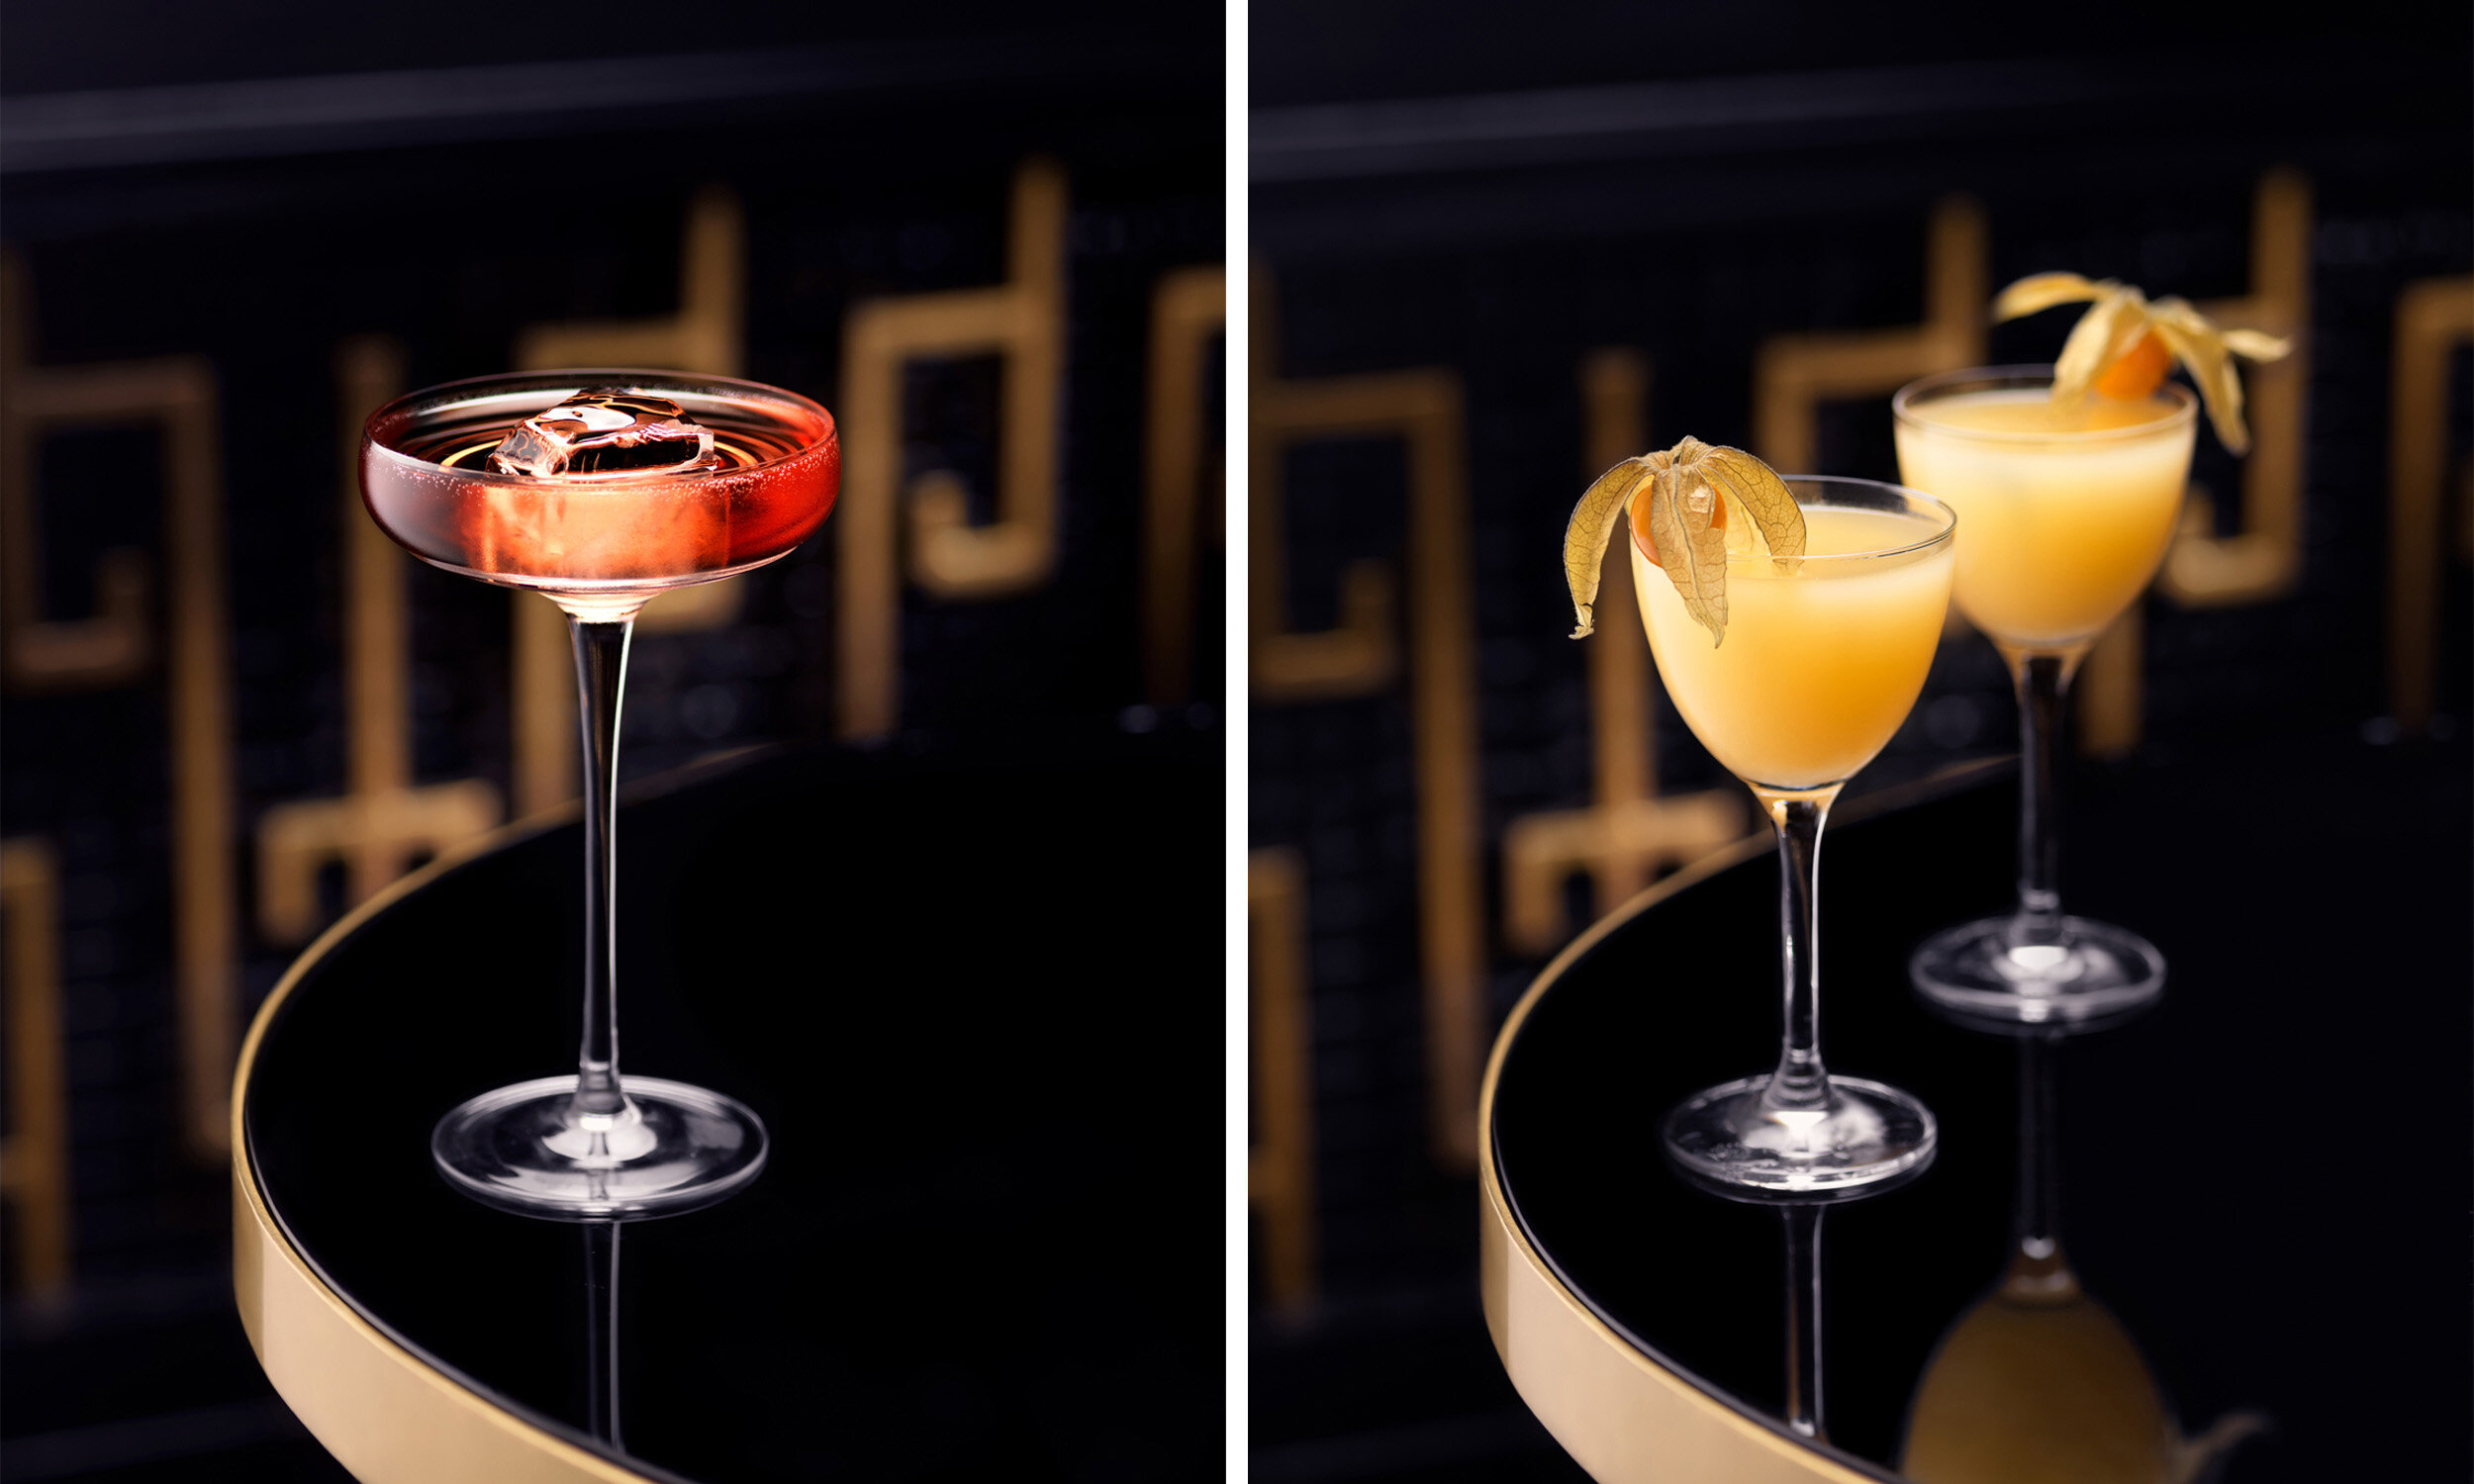 On location drinks photography for luxury hotel The Savoy in London